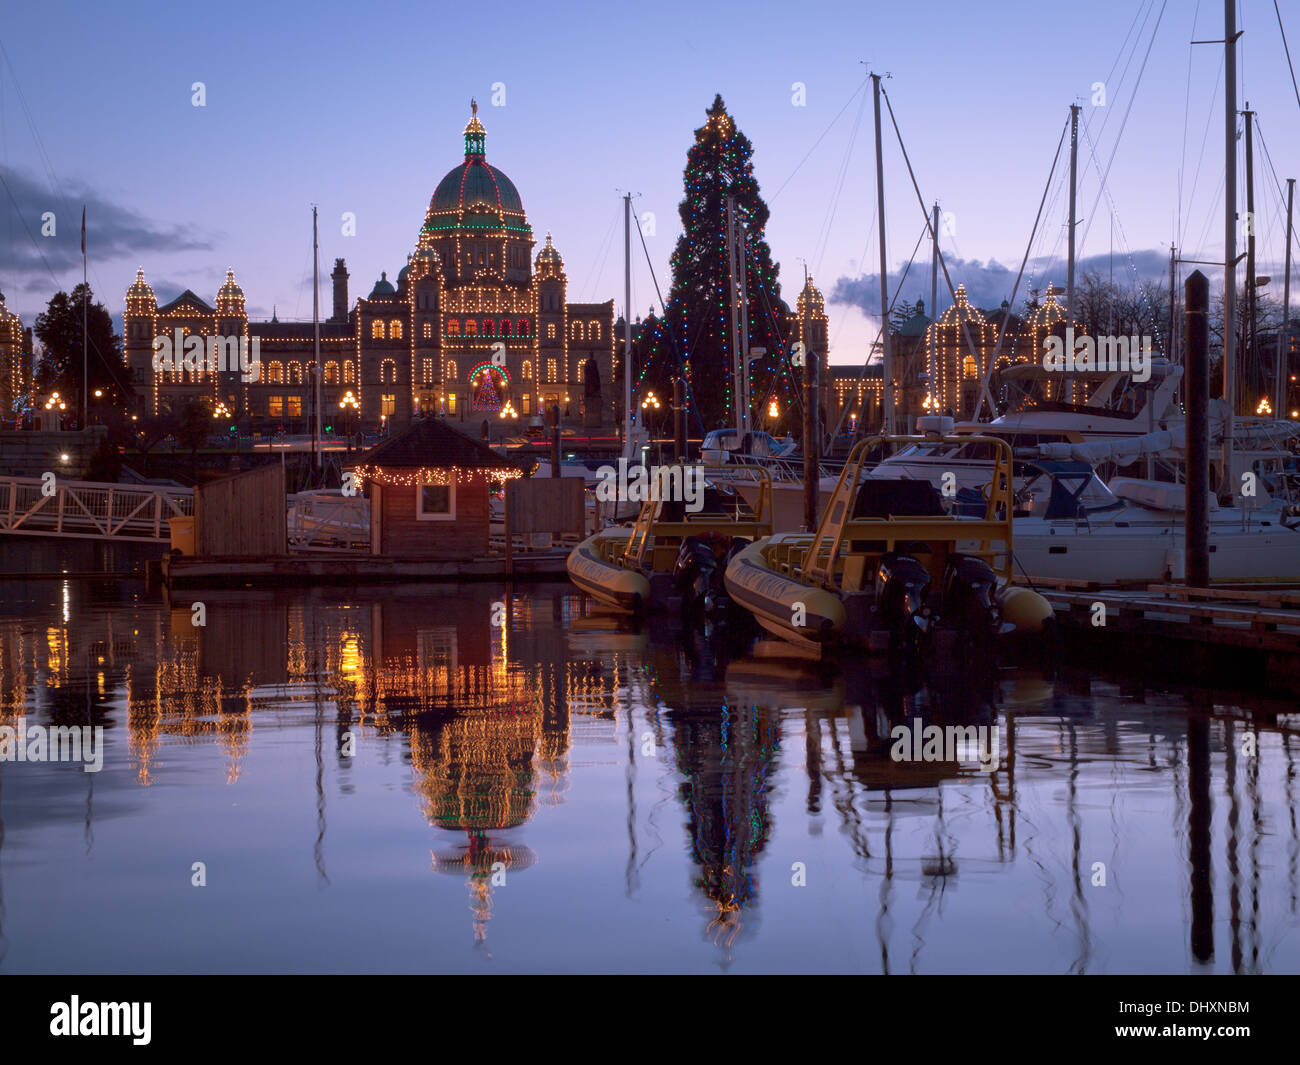 A view of the British Columbia Parliament at Christmas.  Victoria, British Columbia, Canada. Stock Photo